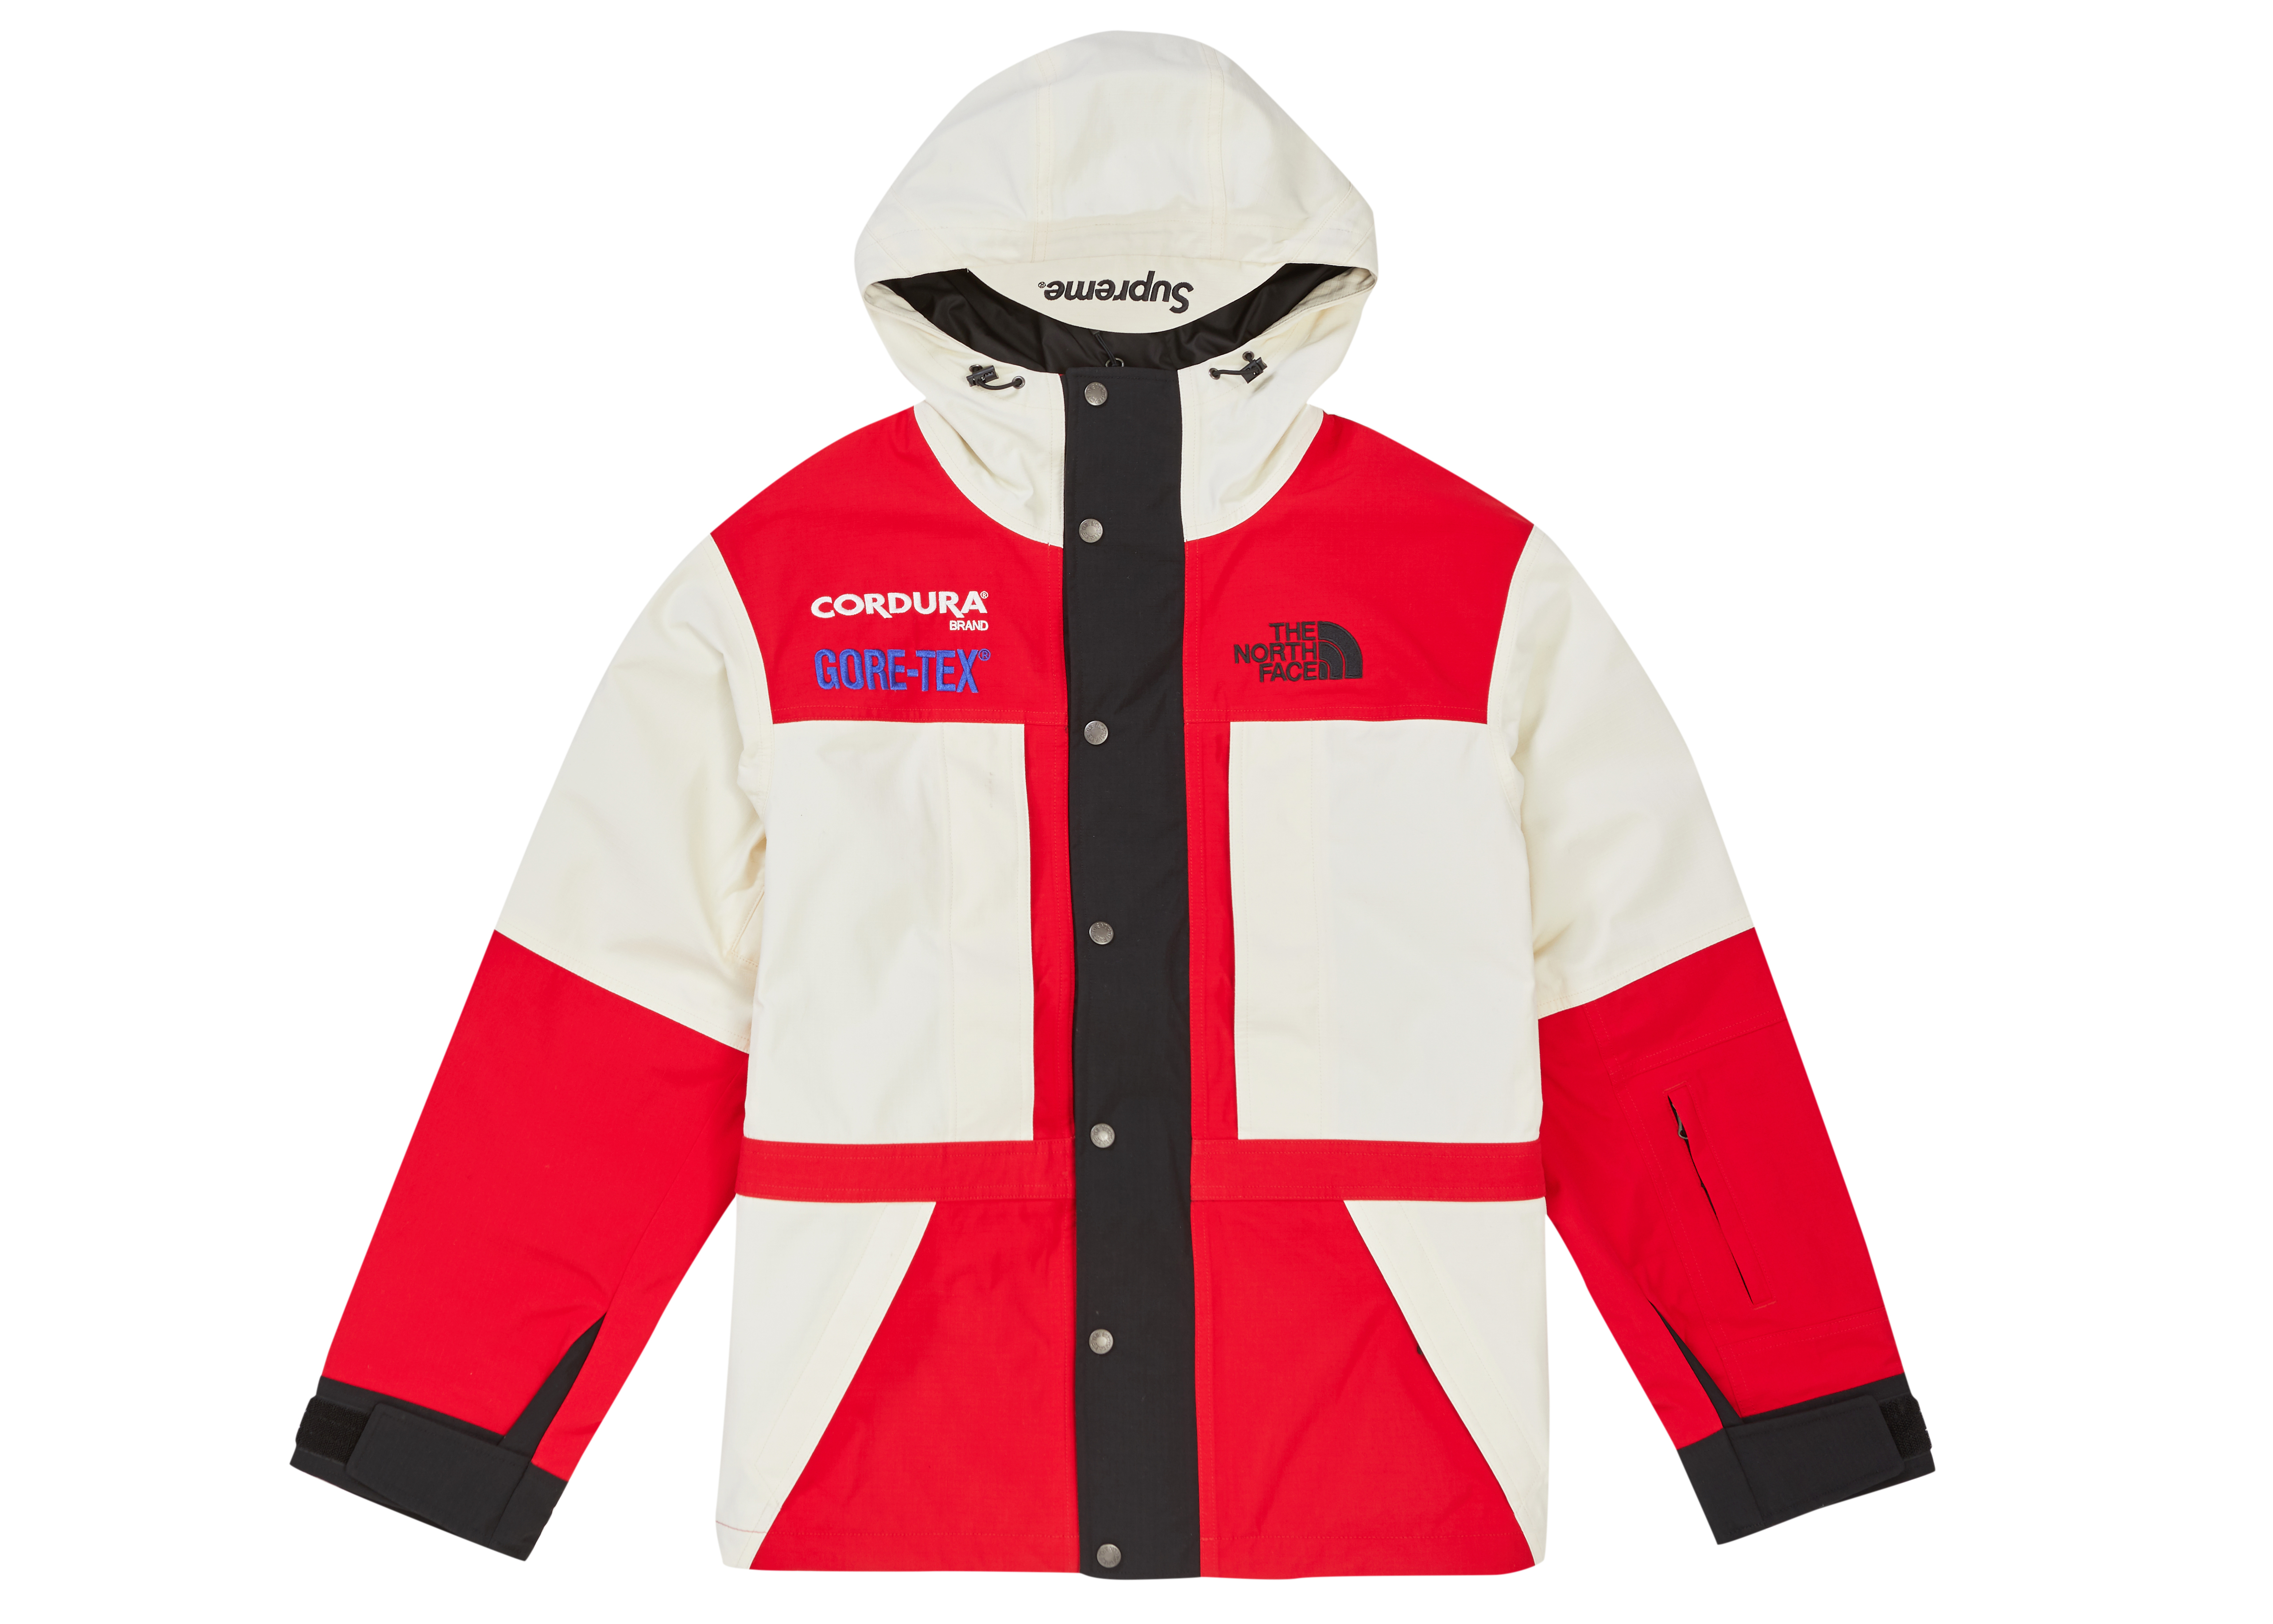 Supreme North Face Jacket Expedition Flash Sales, SAVE 59%.